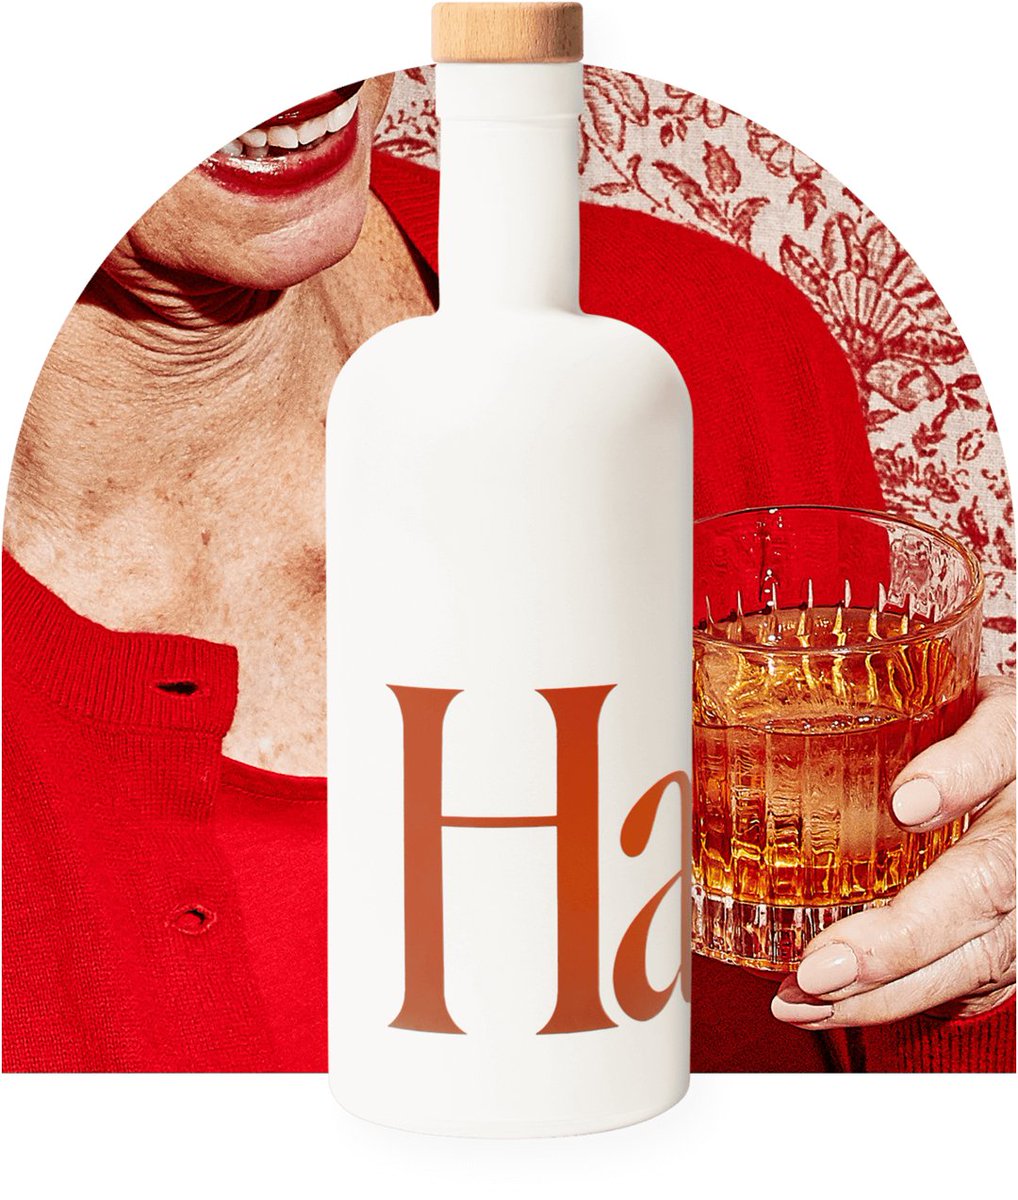 And while it's not booze-free,  @drinkhaus has been making big waves for their DTC-focused spirits that are lighter on alcohol and big on flavor.